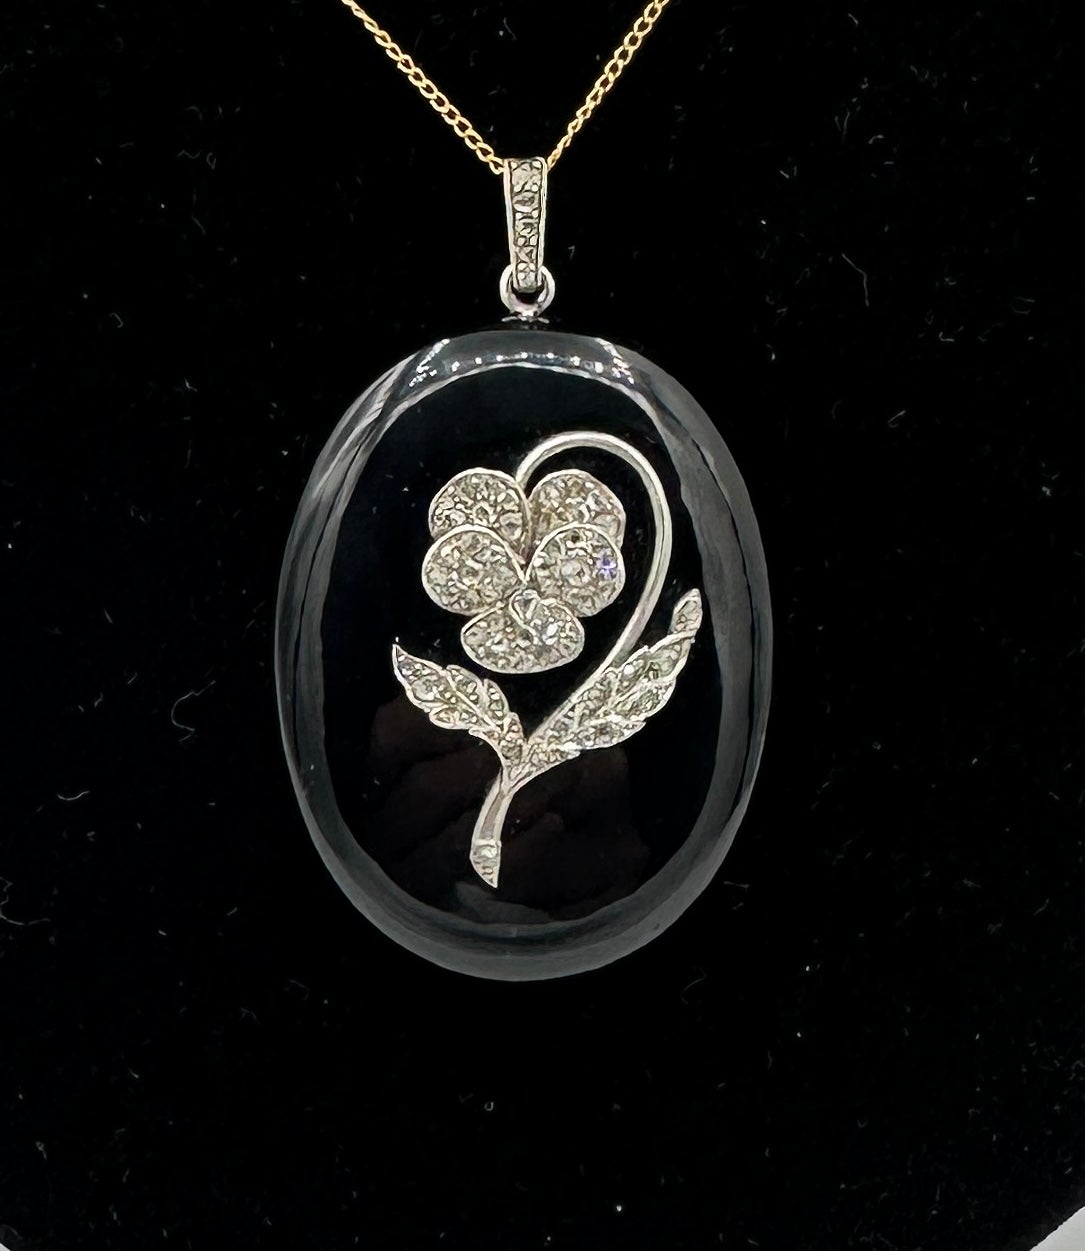 This is a magnificent Victorian to Art Deco Antique Rose Cut Diamond Platinum Locket Pendant with an exquisite diamond set Pansy Flower on the carved Black Onyx and Platinum locket.   The picture locket is one of the finest antique lockets we have